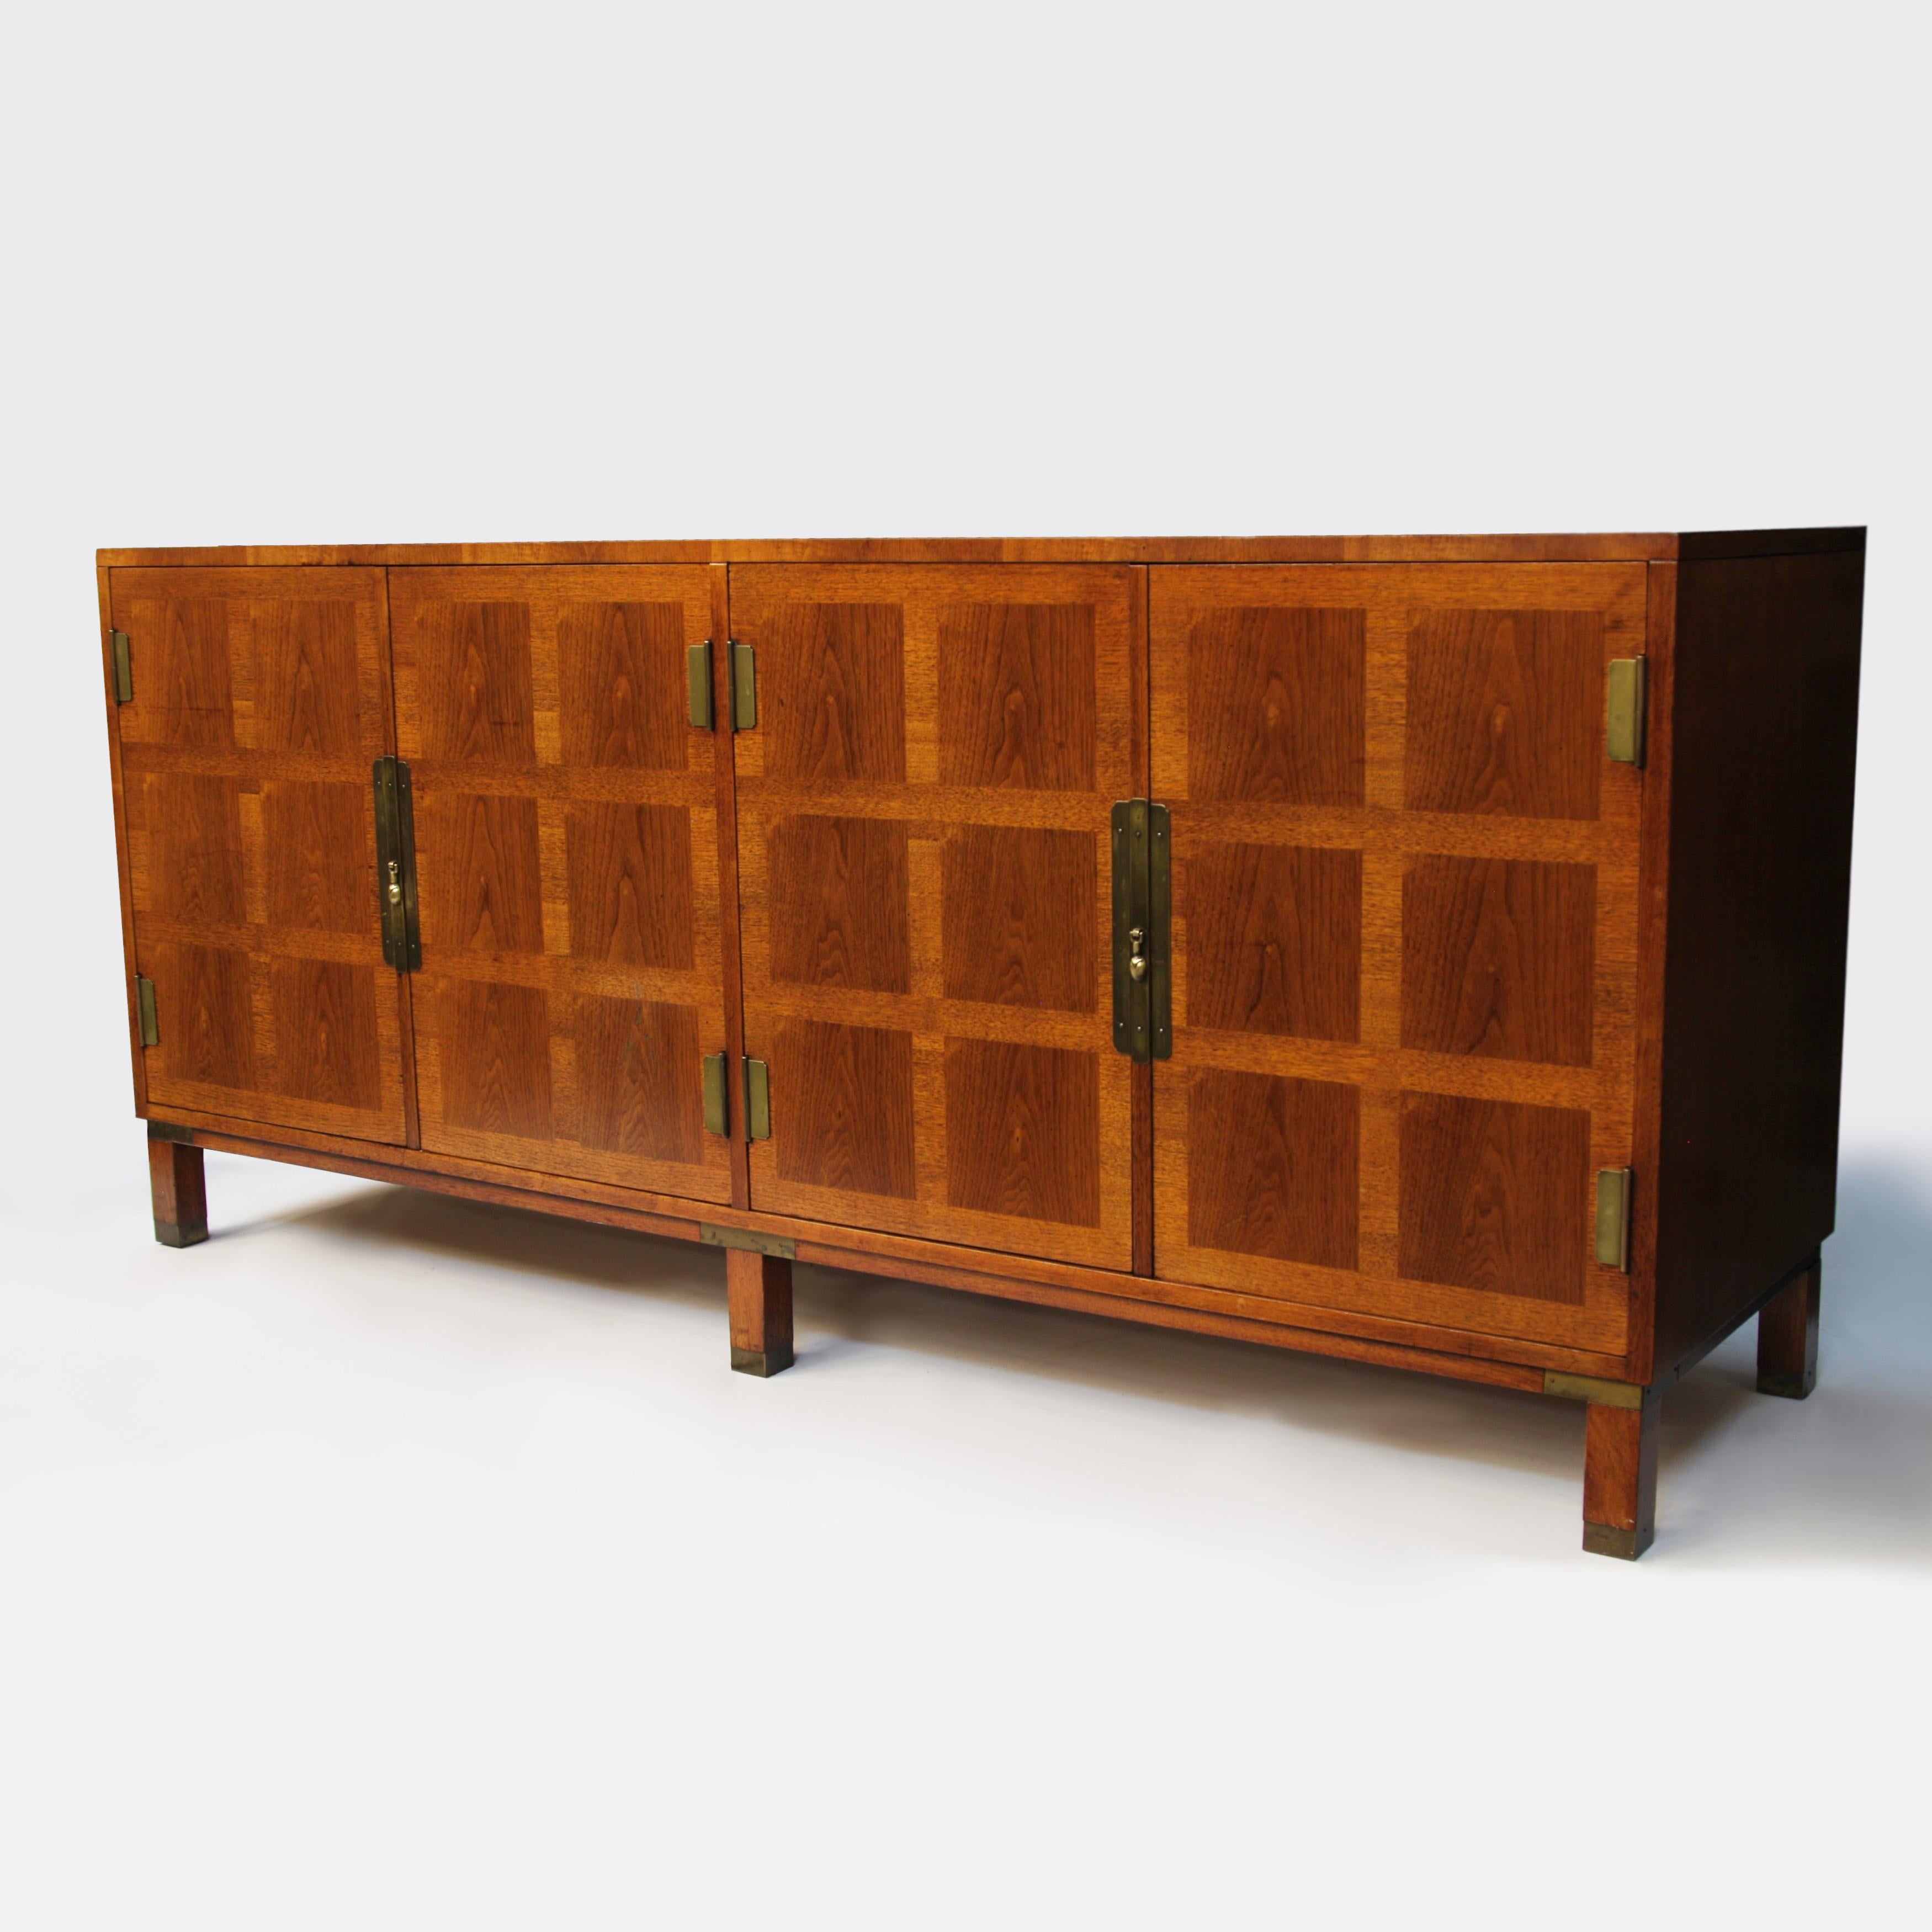 Fantastic walnut & oak credenza designed by Michael Taylor as part of the 